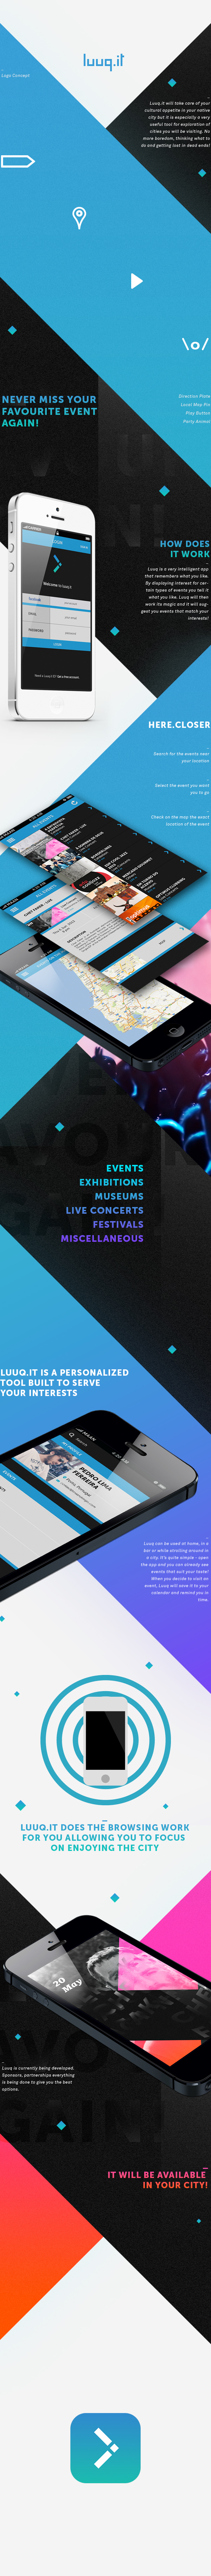 maan luuq iphone app application user interface UI cultural Events Portugal